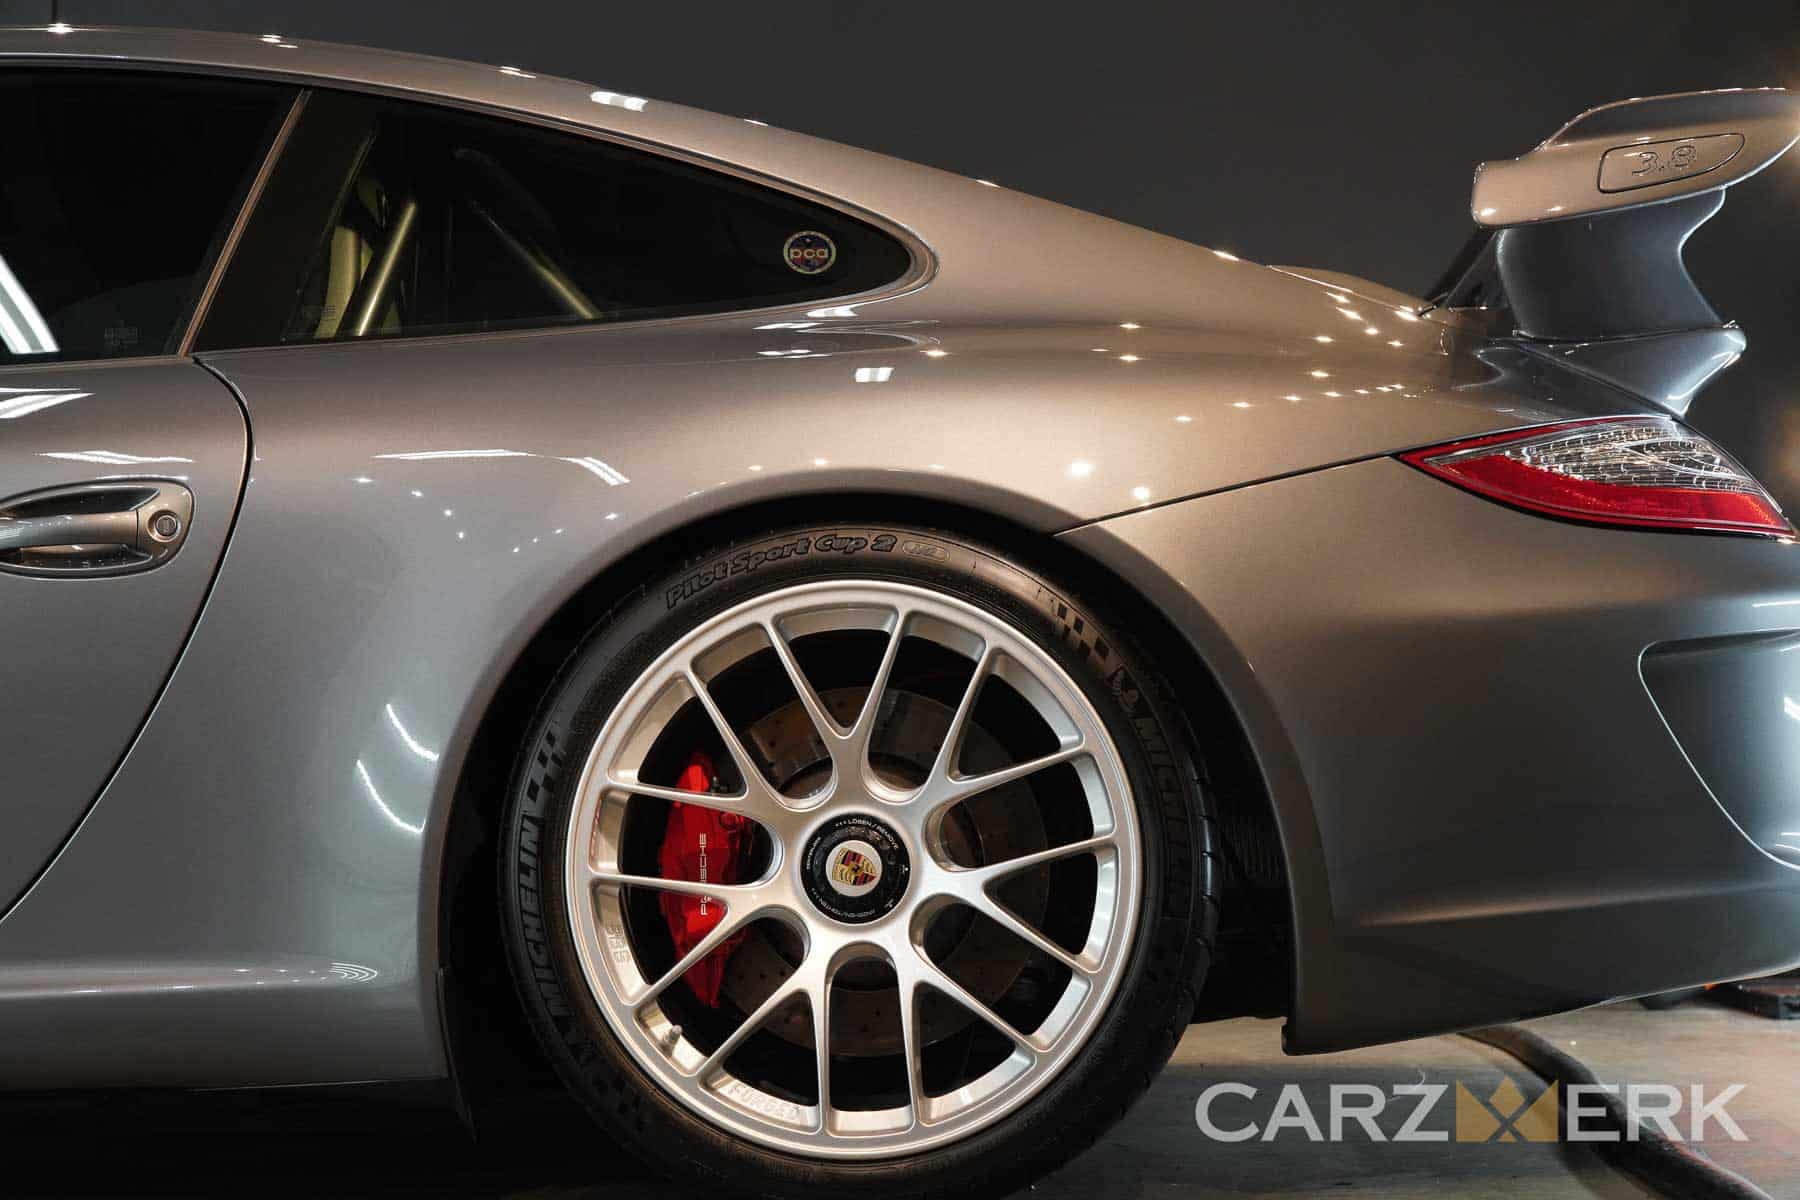 2011 Porsche GT3 - Meteor Grey Metallic - with Rear BBS Forged Wheel and Red Brake Caliper